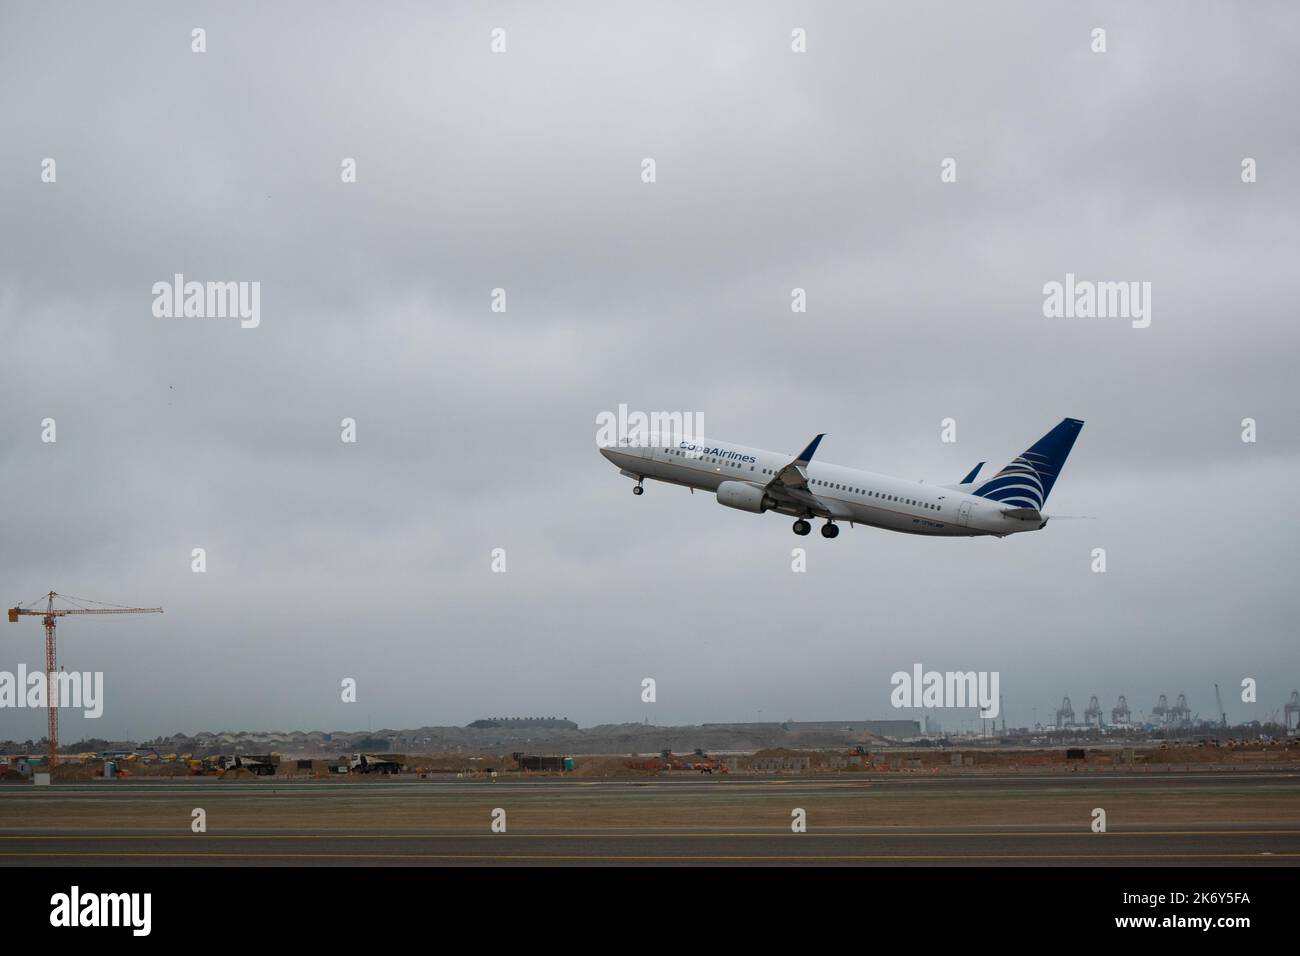 Lima, Peru - July 27 2022: Plane Taking off from the Airport on a Cloudy Day Stock Photo